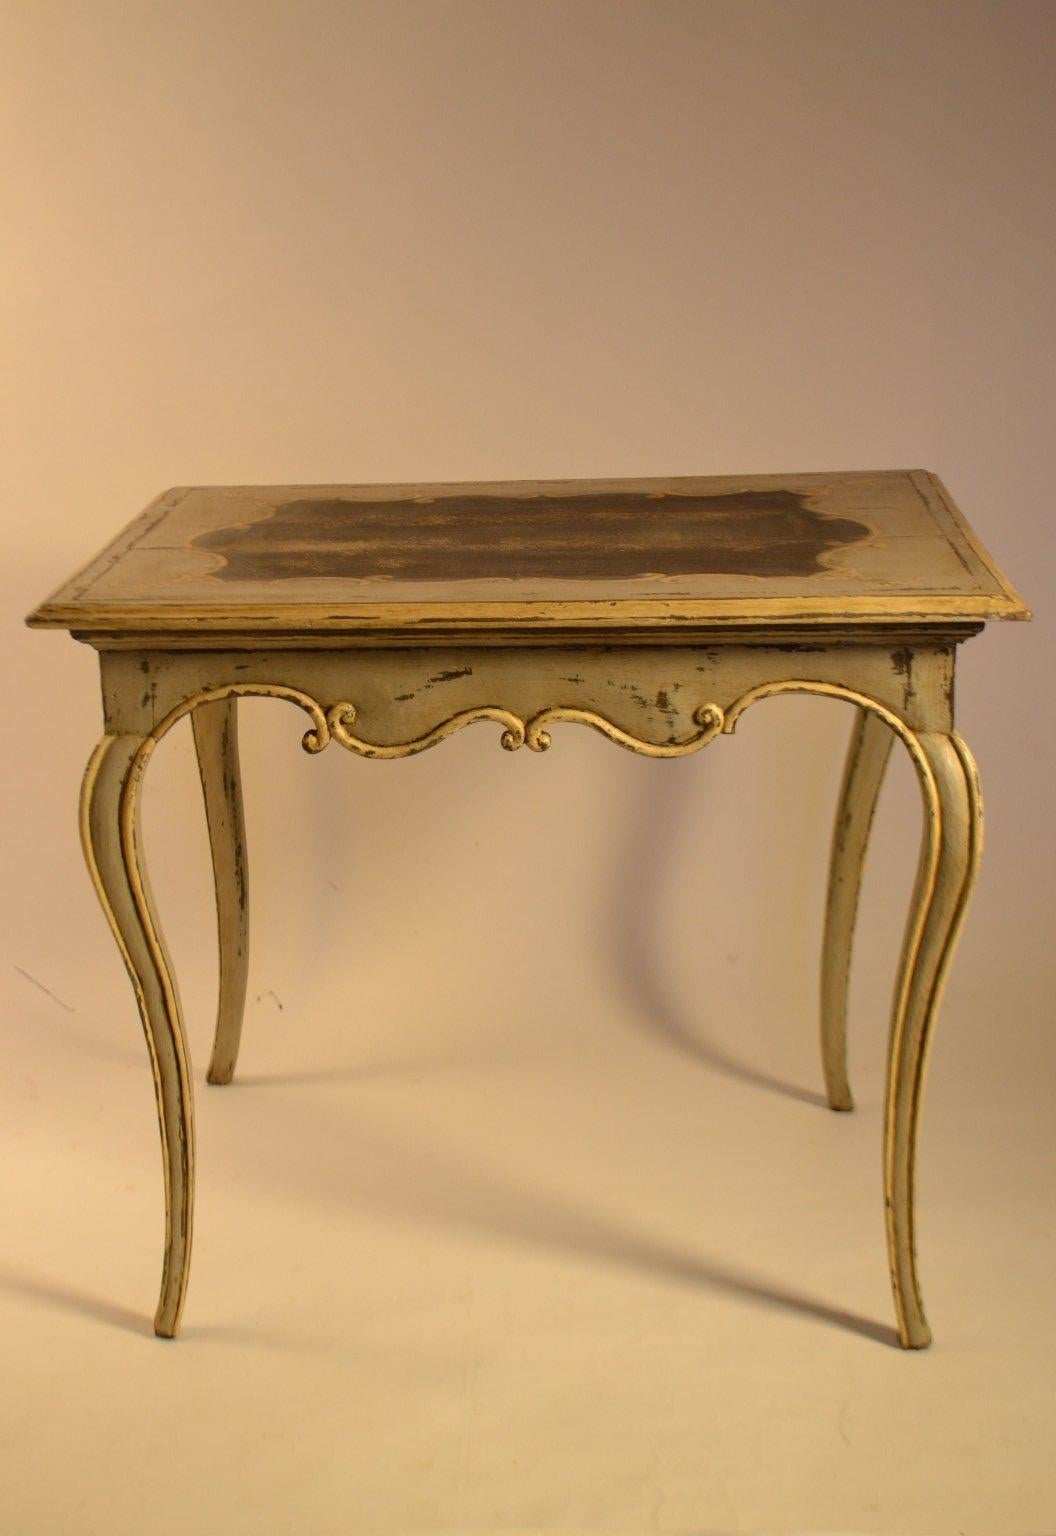  Louis XV period table with a dainty and finely carved apron in a bow transom pattern and elegant cabriole legs. The top is painted with a dark interior and C-scroll border with bell flower style tassels.